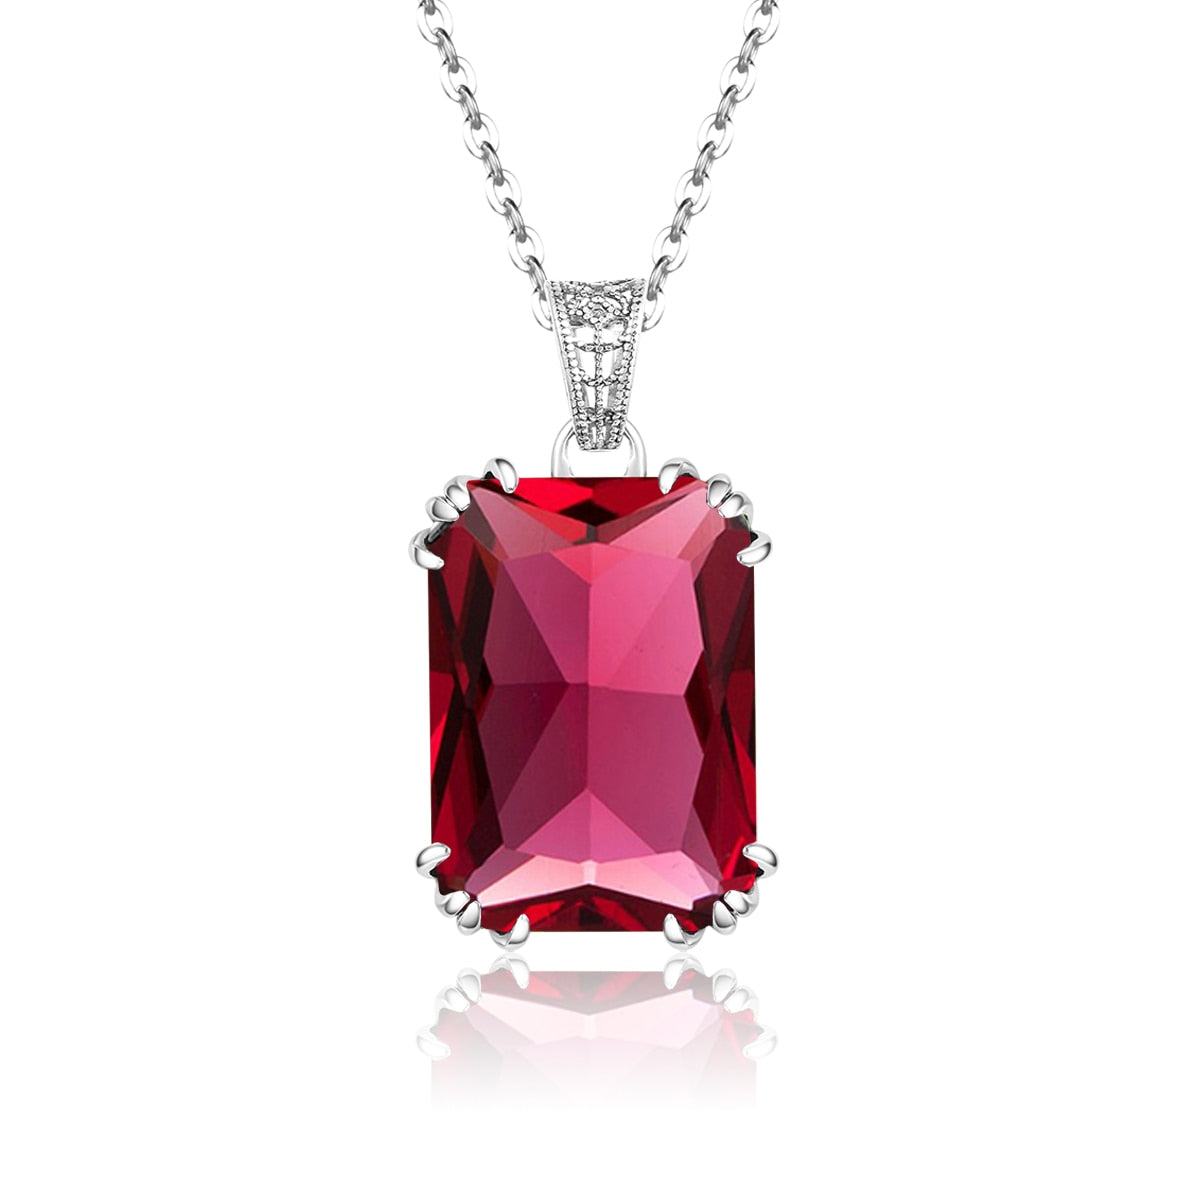 100% Real 925 Sterling Silver Fine Jewelry Necklace Square Garnet Classic Slide Pendants For Women Accessories Silver 925 Gifts ruby